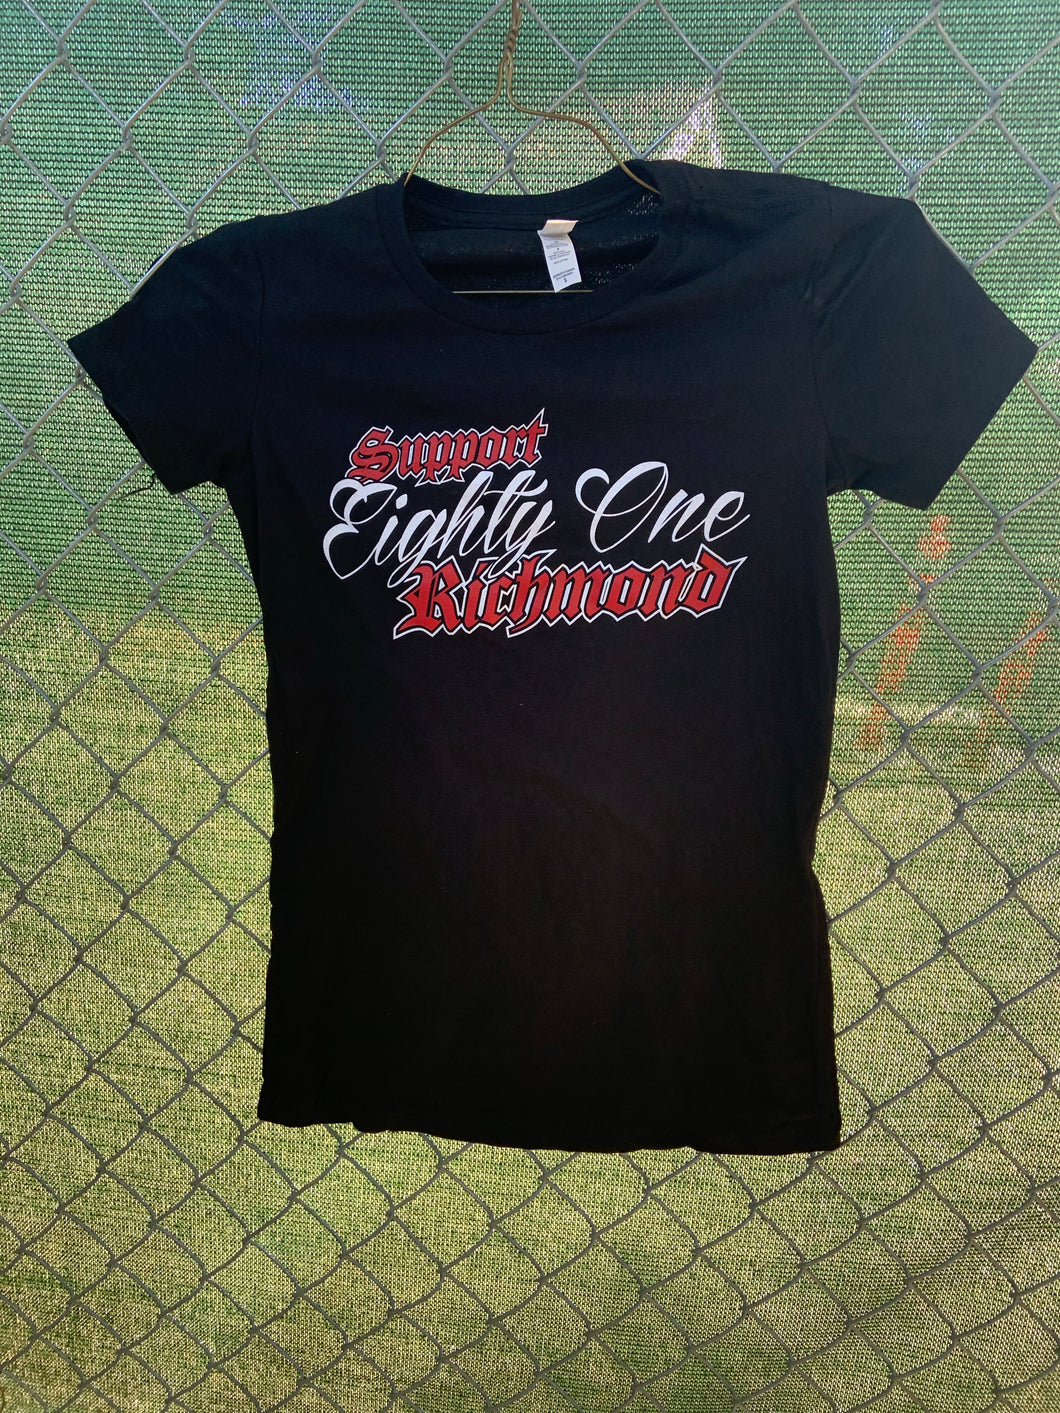 Black t shirt support eighty one richmond on front